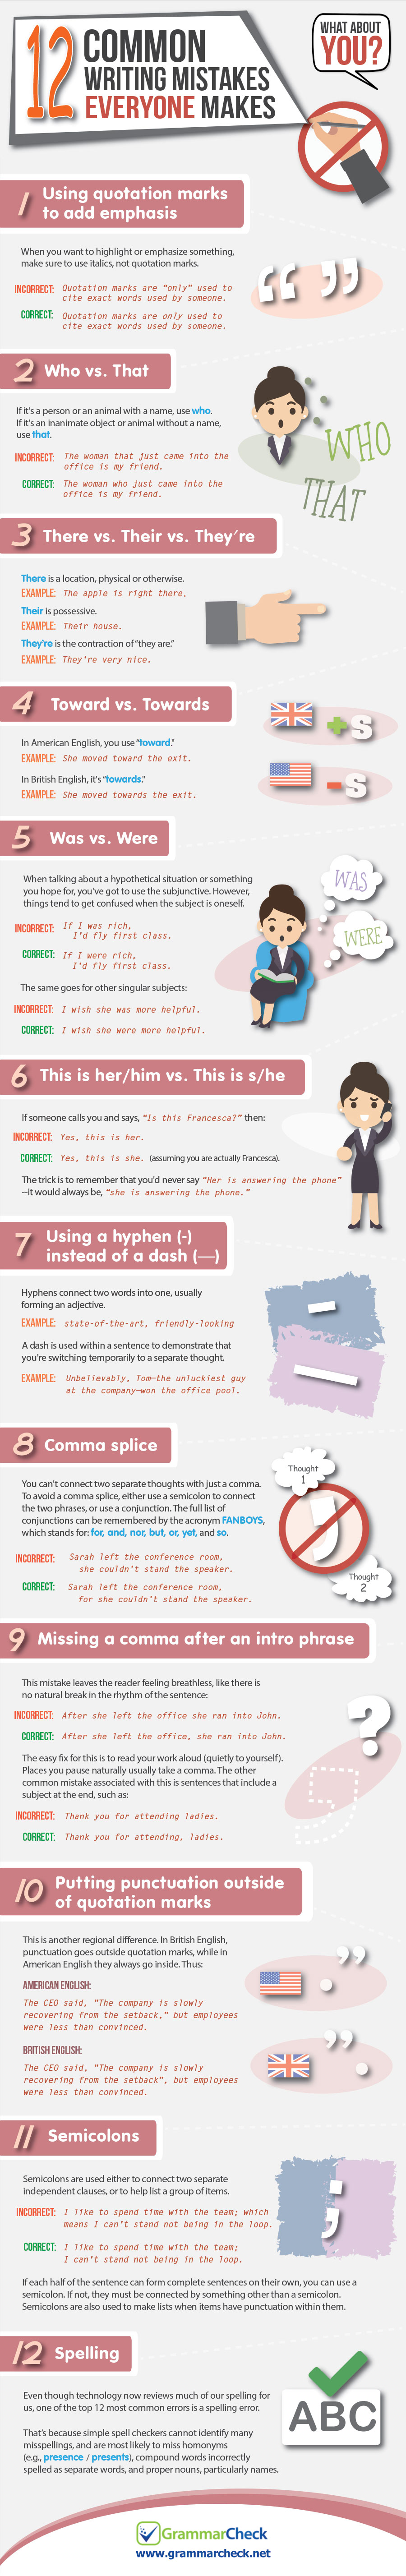 12 Common Writing Mistakes Everyone Makes (Infographic)